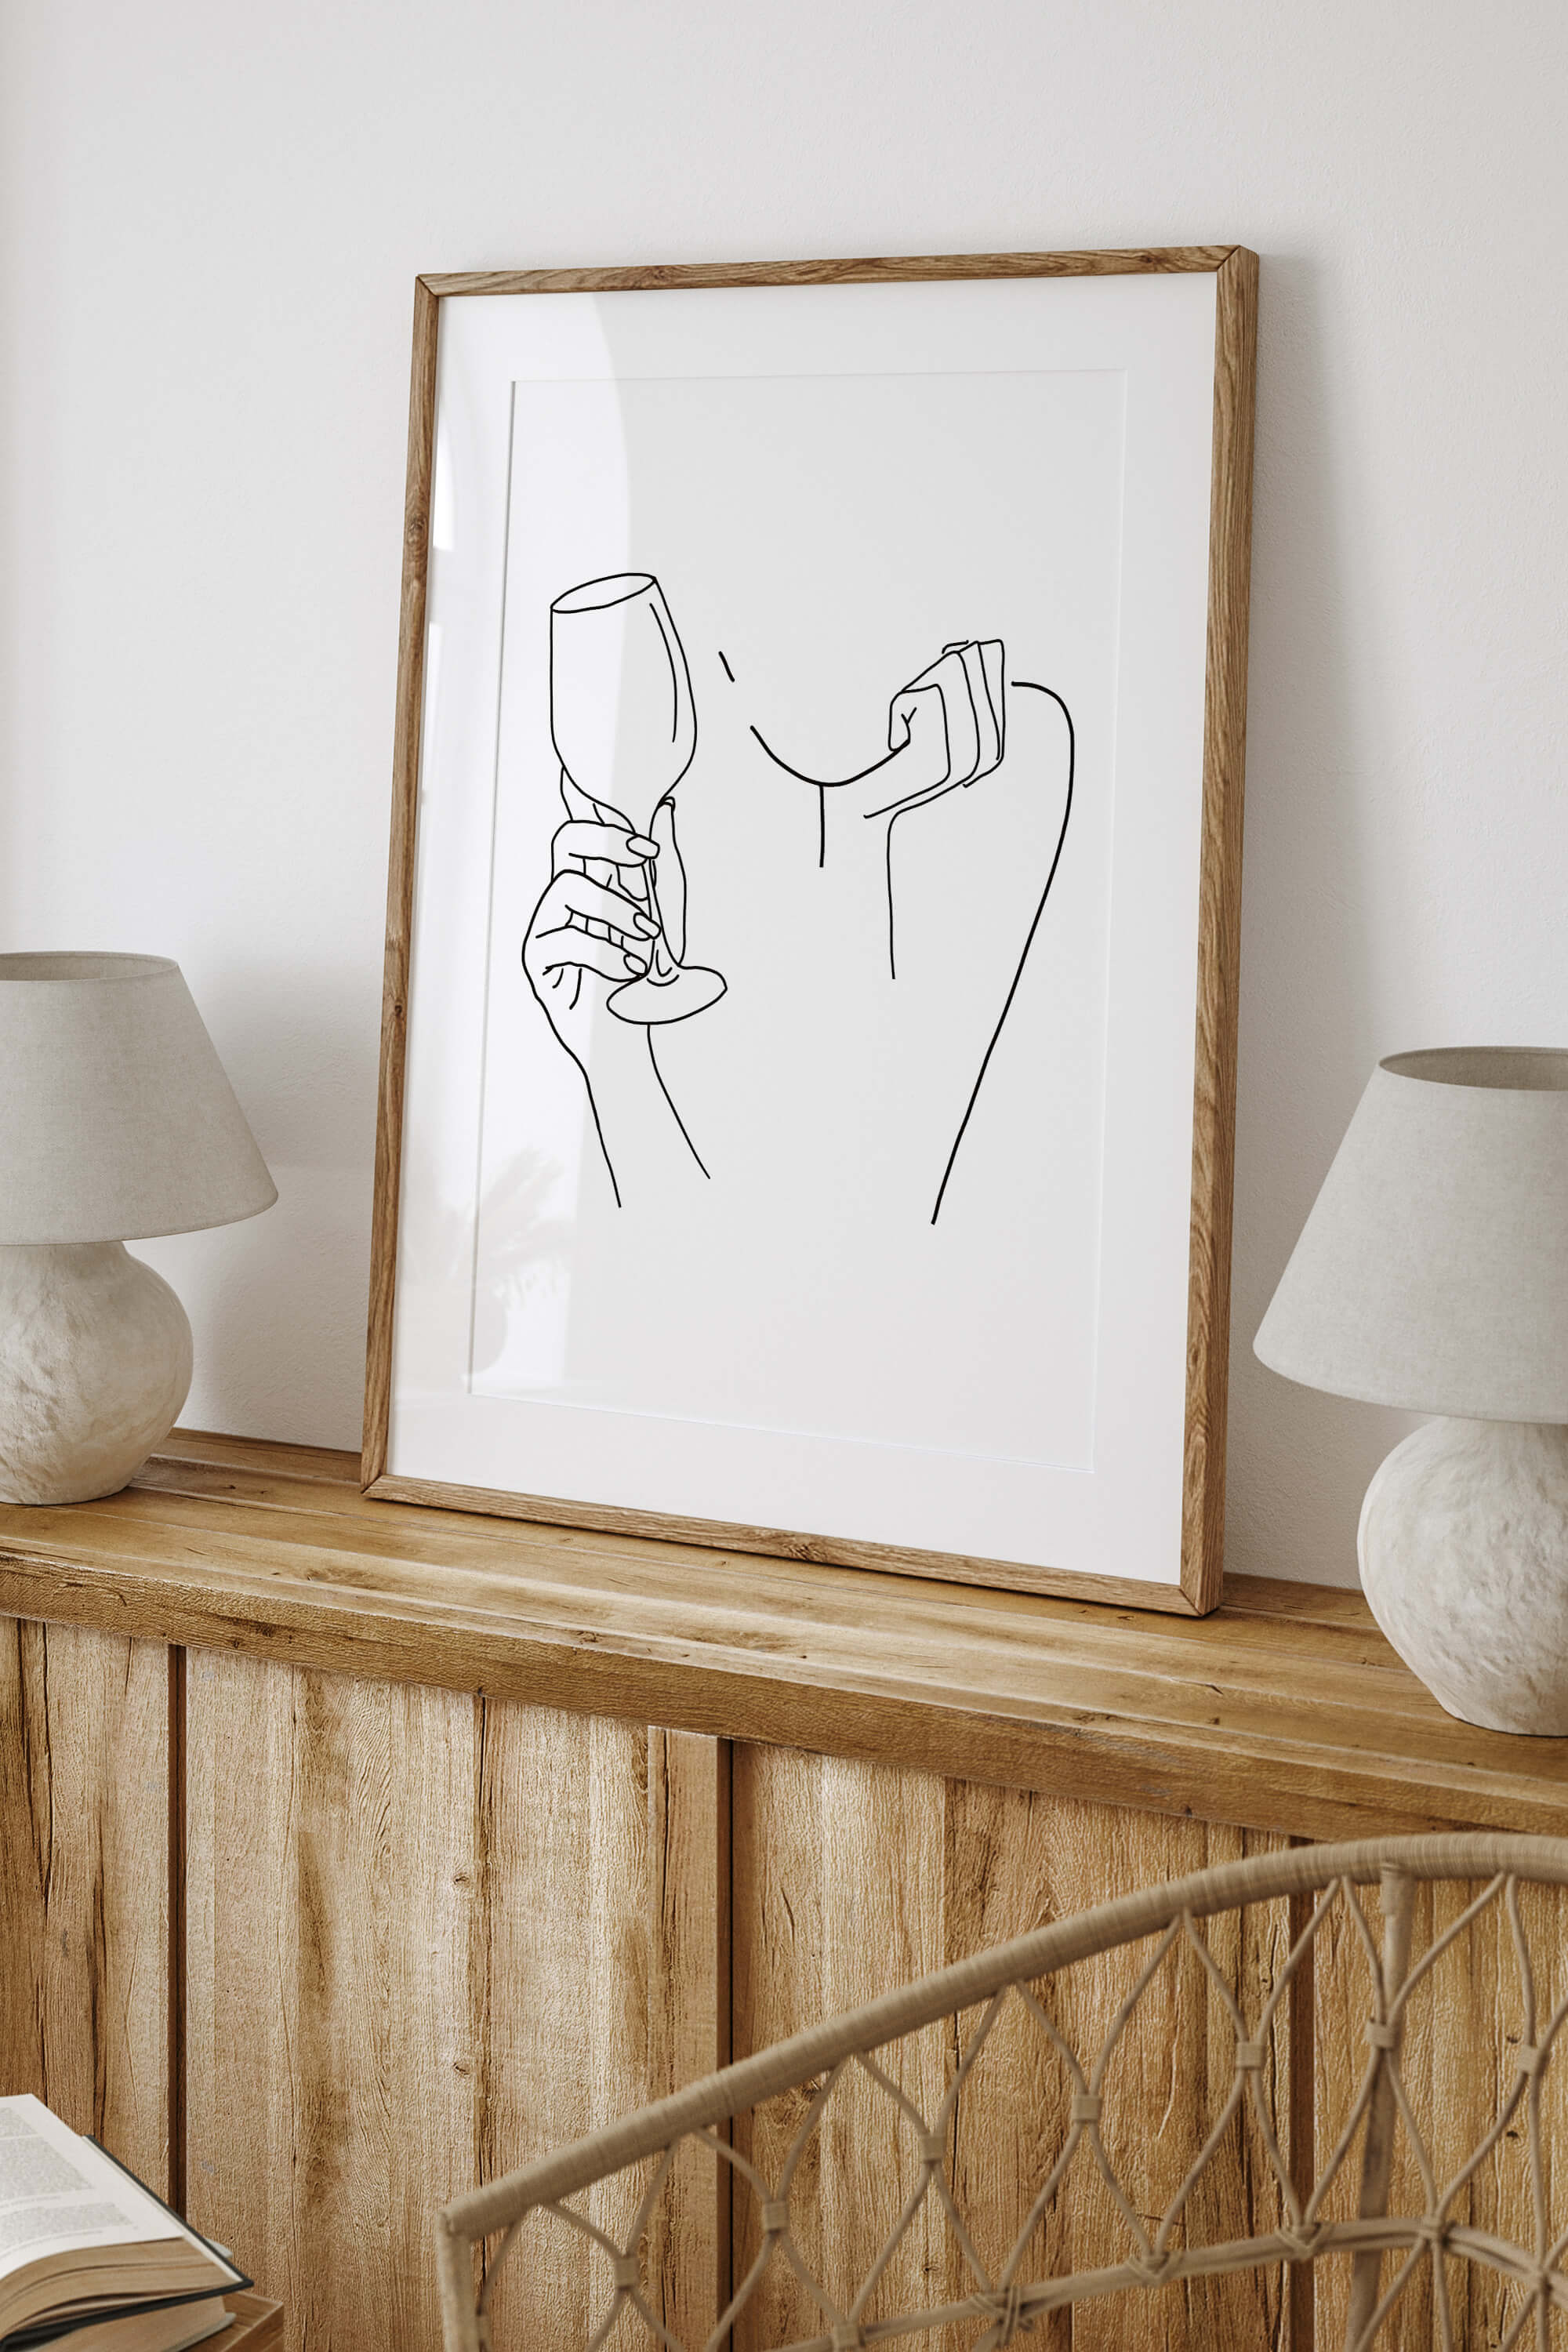 Transform your space with this bar wall decor featuring a harmonious blend of line art and abstract flair. The dynamic composition and thoughtful use of negative space make it a unique statement piece that adds character to any room.